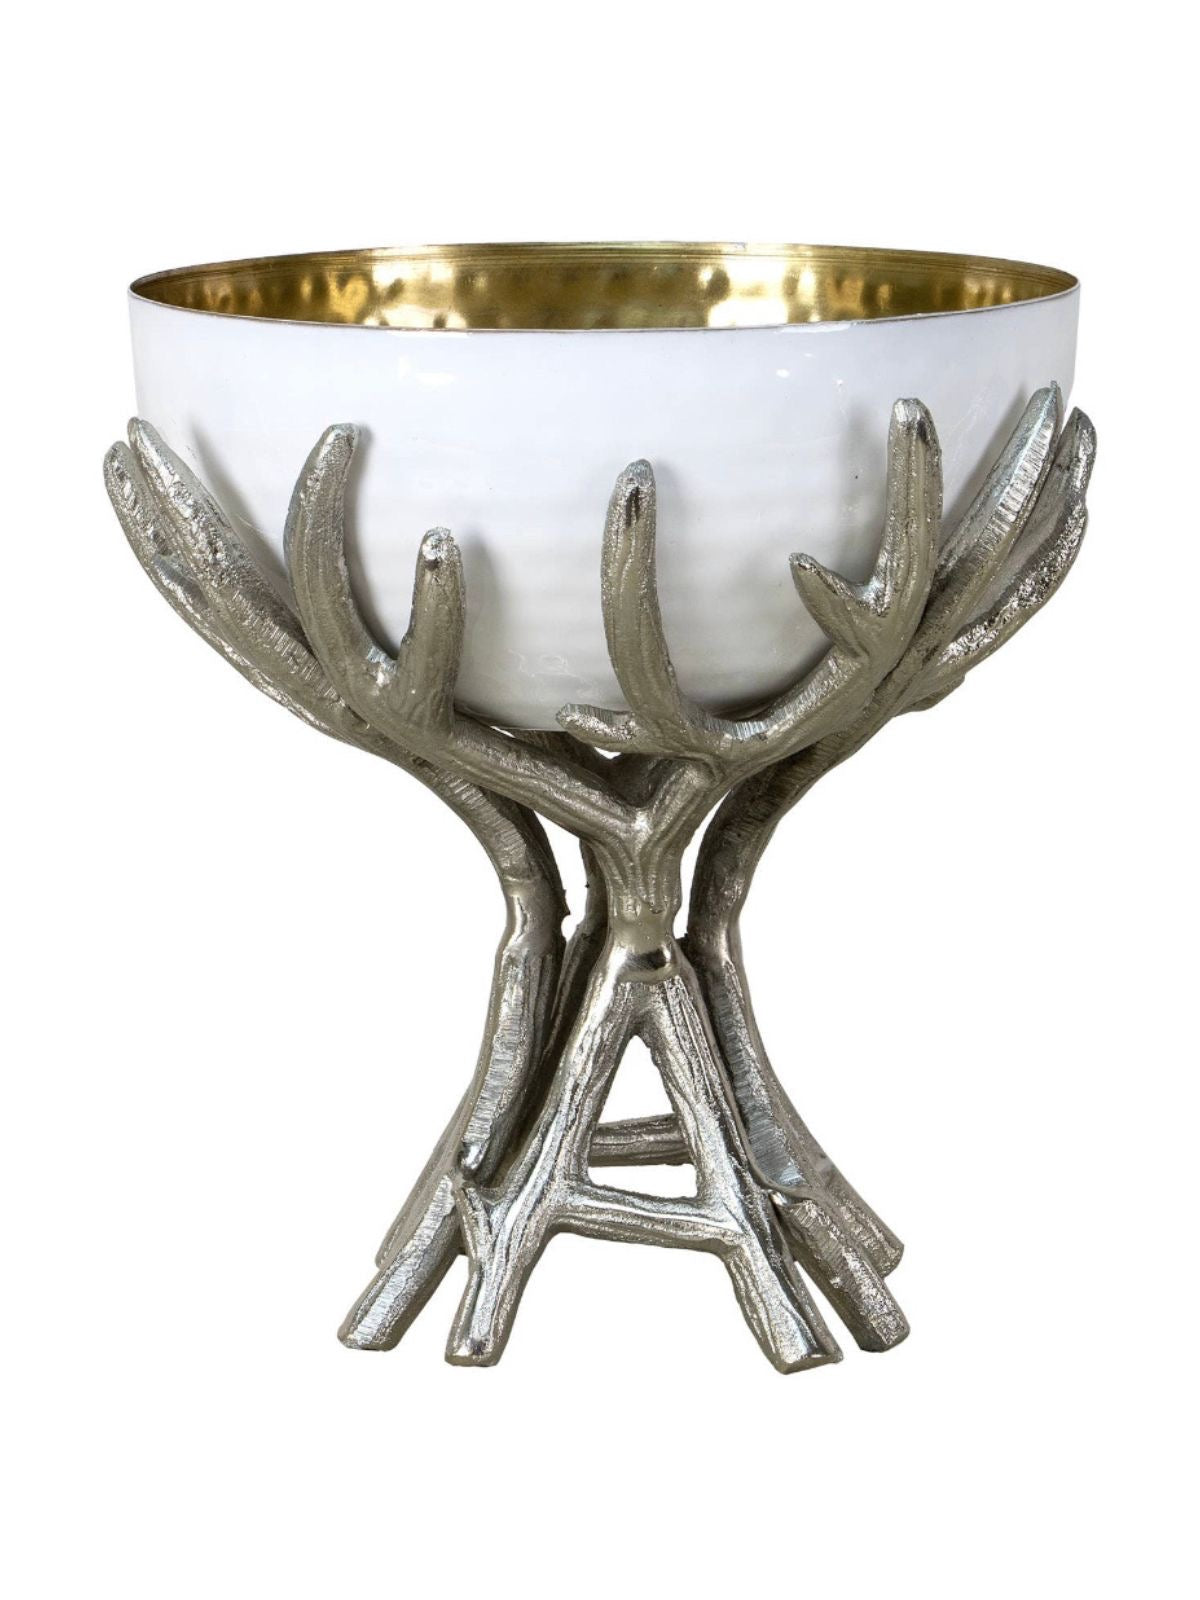 9.5D x 9H decorative white bowl with gold interior sitting on a silver branch stand, sold by KYA Home Decor.